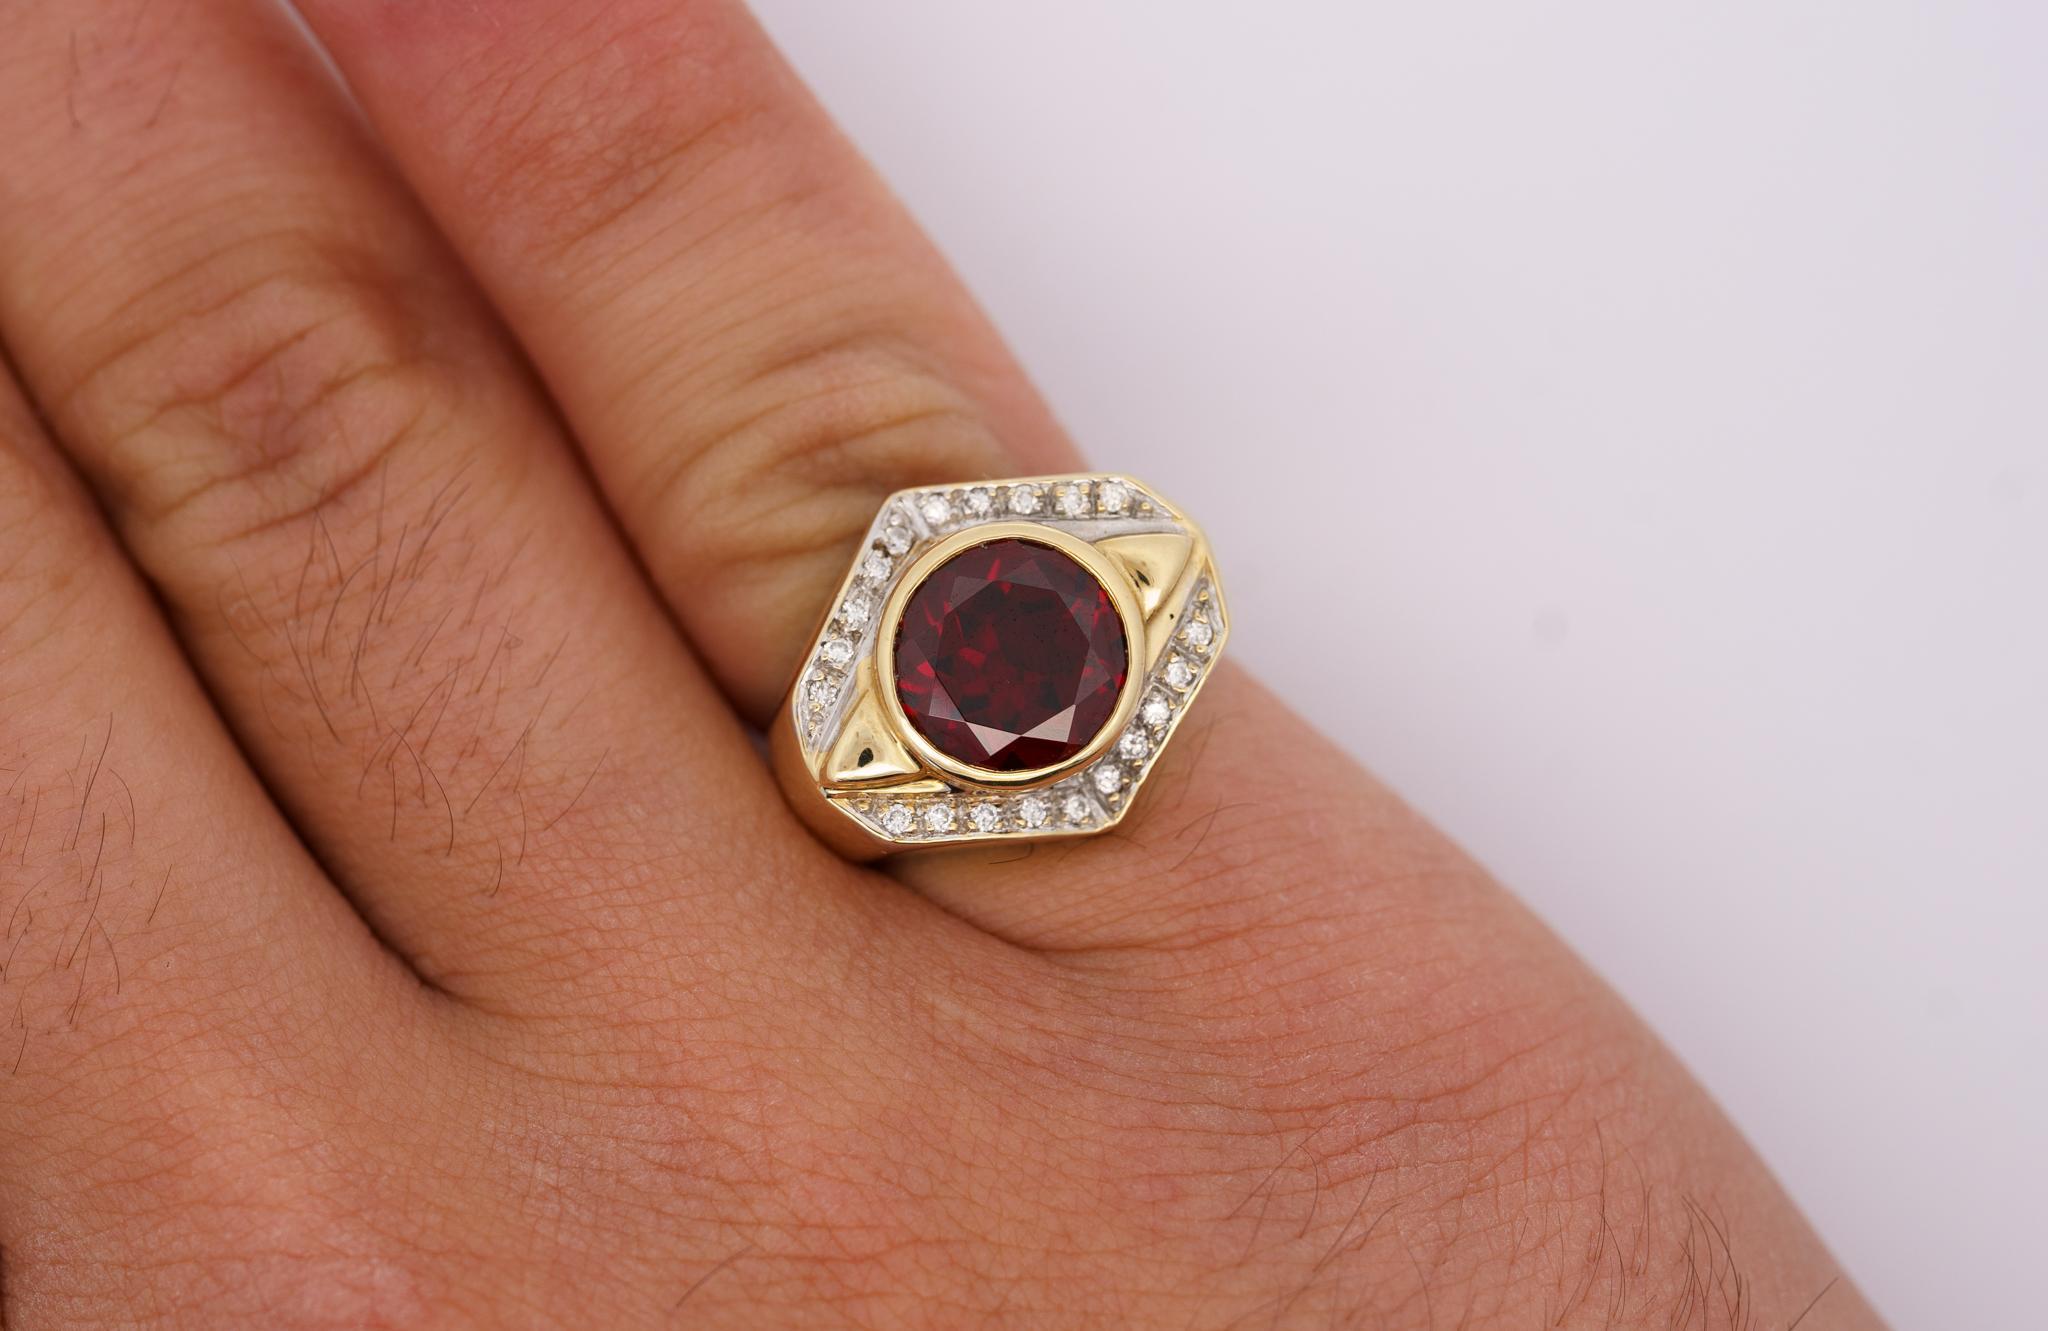 GIA Certified 3.3 Carat Garnet Bezel Set With Diamonds In 14k Gold Men's Ring In New Condition For Sale In Miami, FL